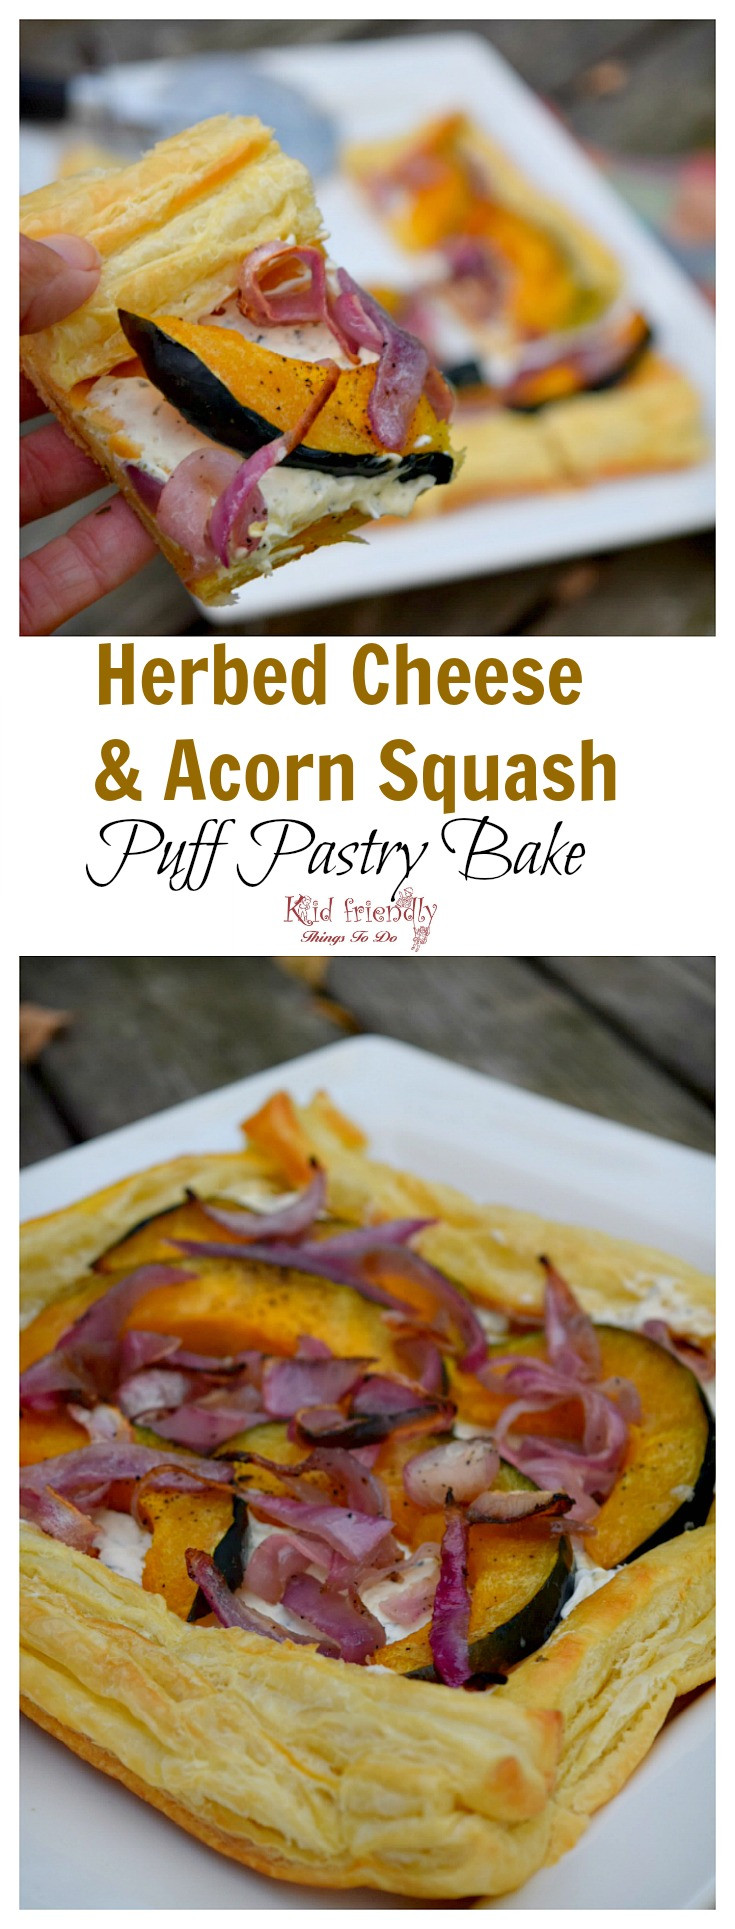 Puff Pastry Appetizers Cheese
 Herbed Cheese & Acorn Squash Puff Pastry Appetizer Recipe